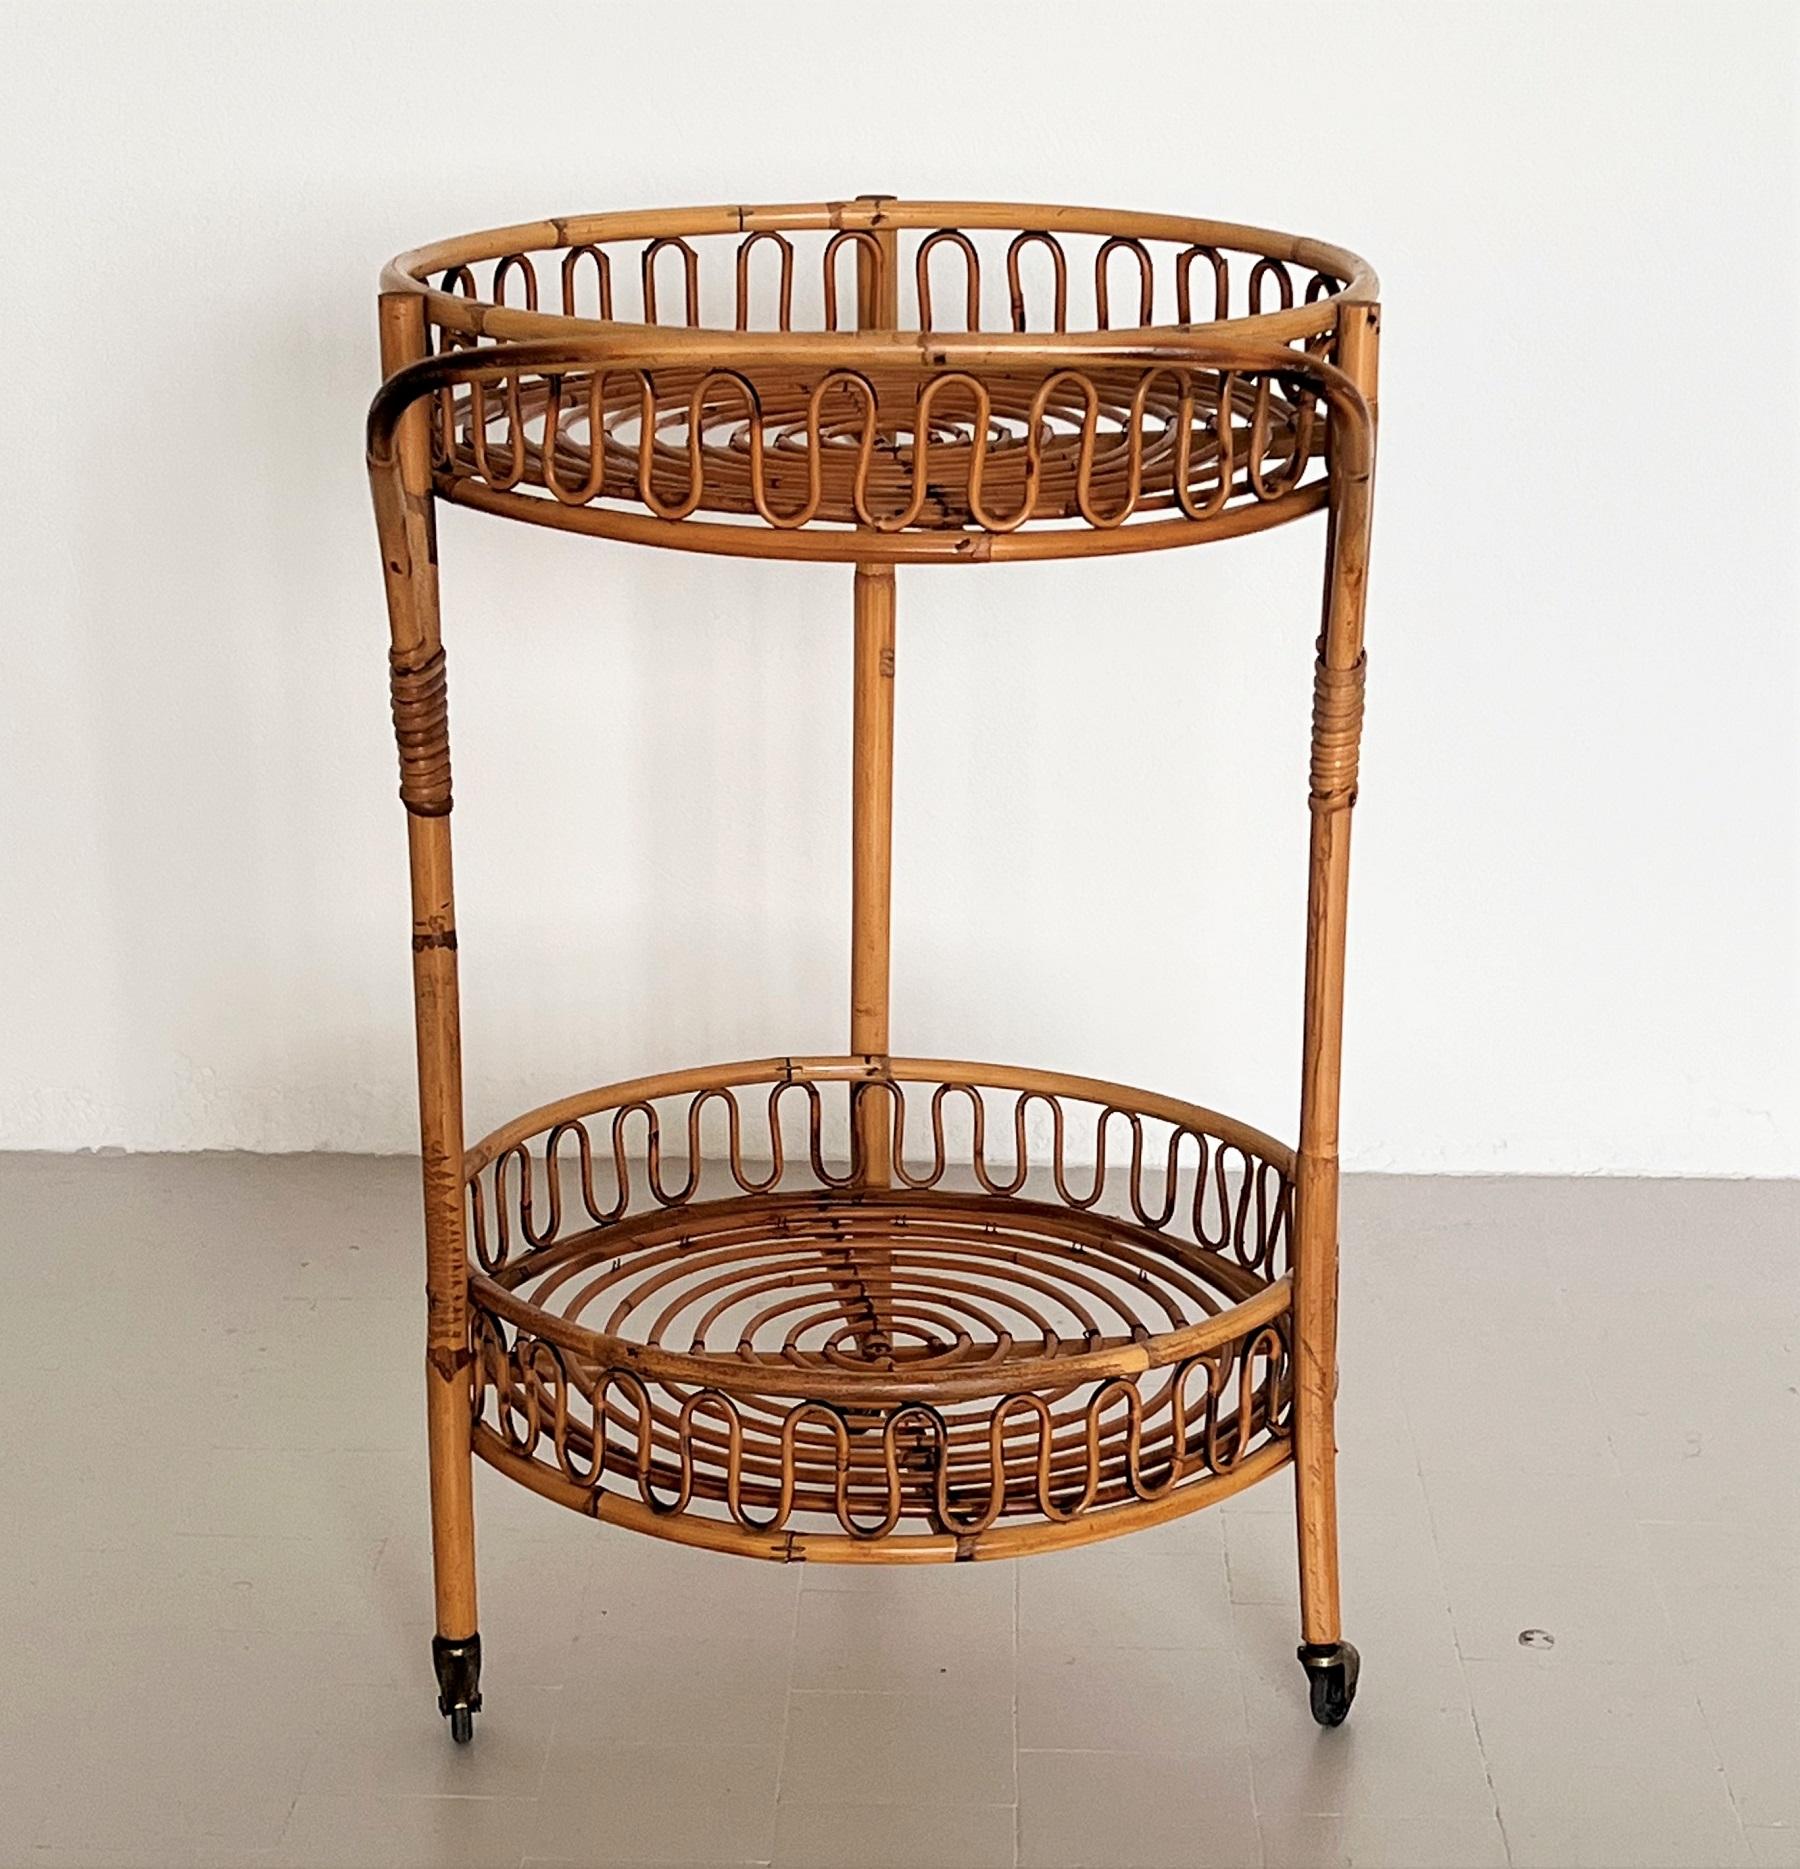 Hand-Crafted Italian Mid-Century Bamboo and Rattan Serving Bar Cart or Trolley, 1970